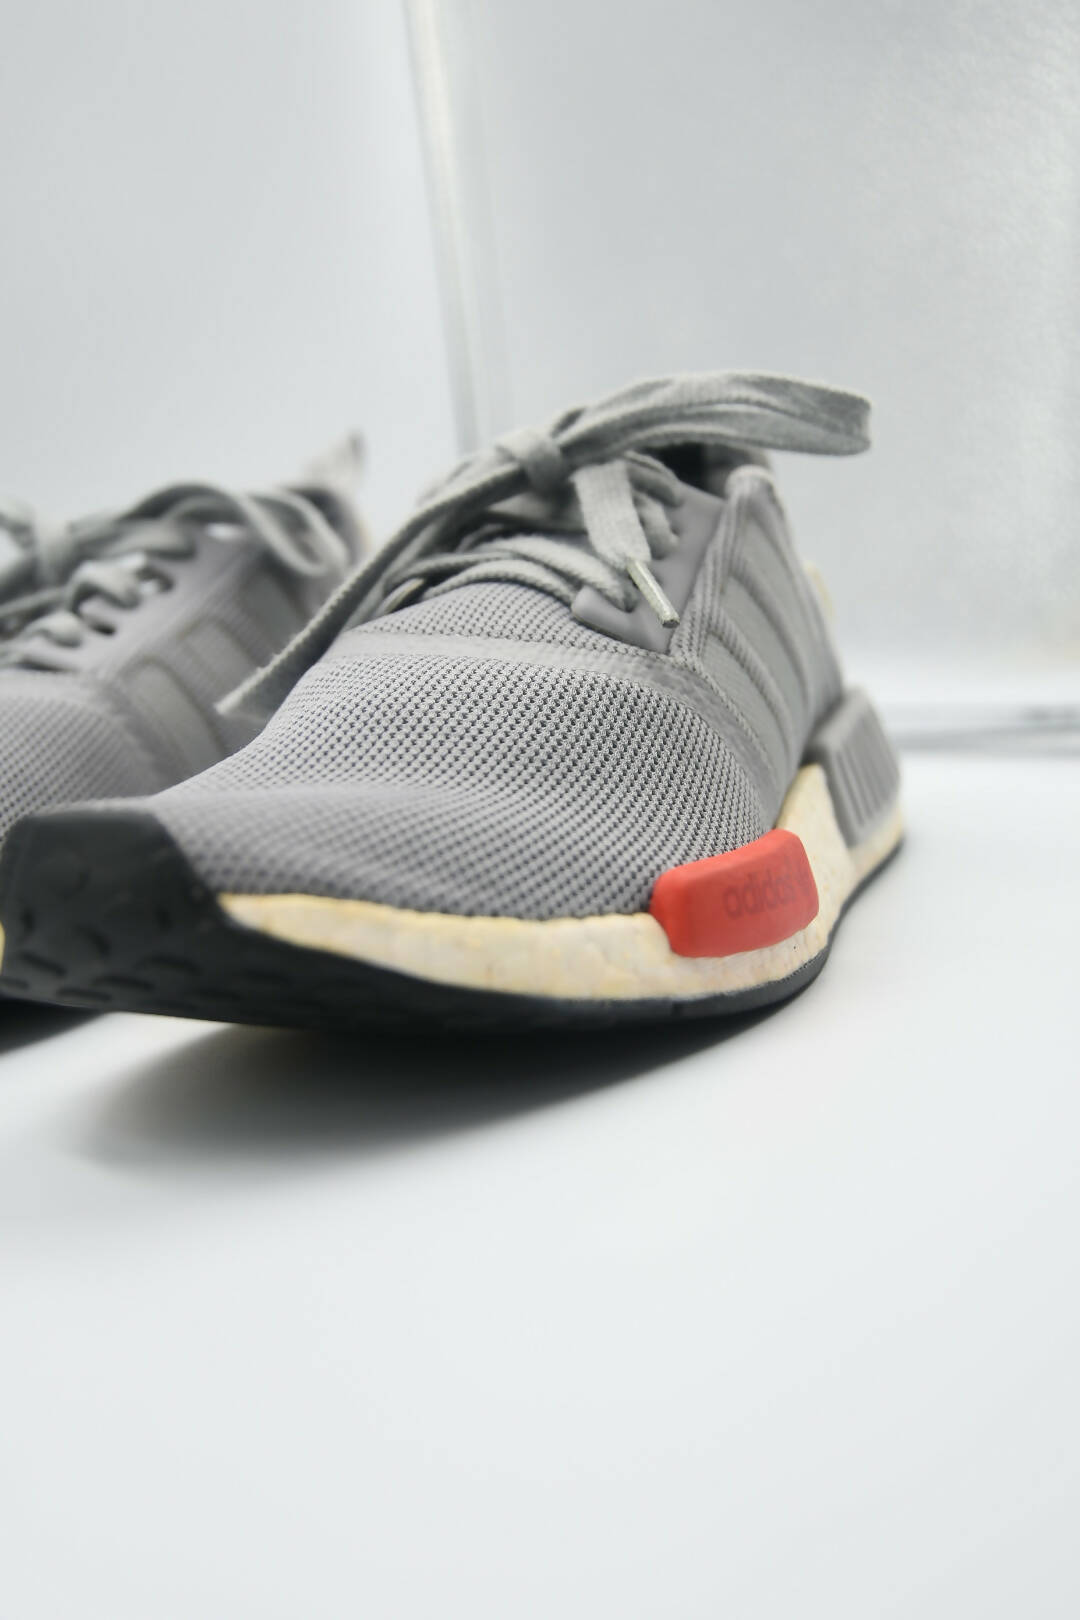 Image of Adidas Nmd R1 Moscow